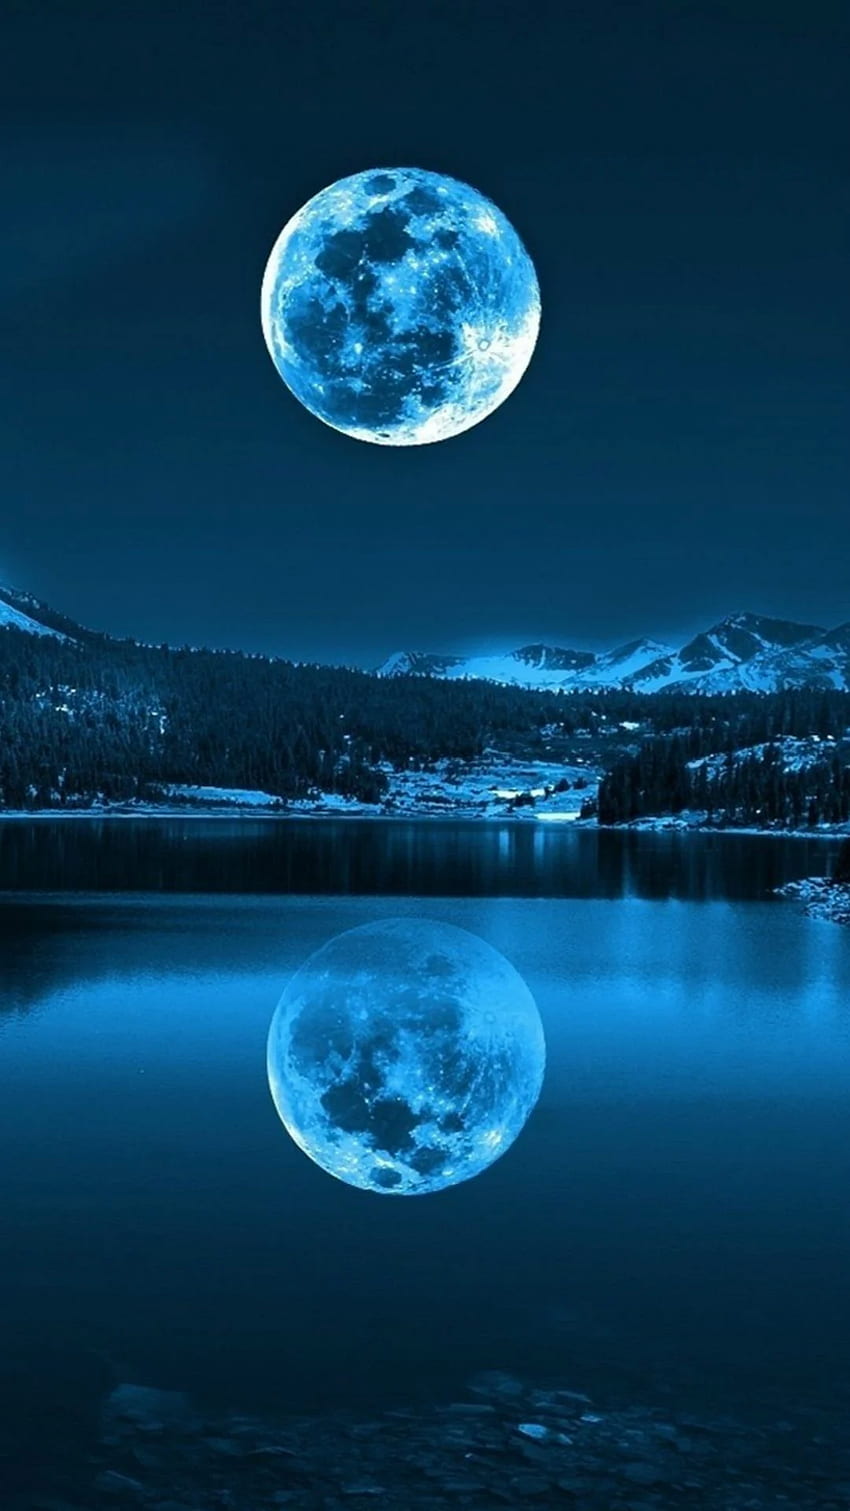 NATURAL IPHONE FOR THE NATURE LOVERS. Moon shadow HD phone wallpaper